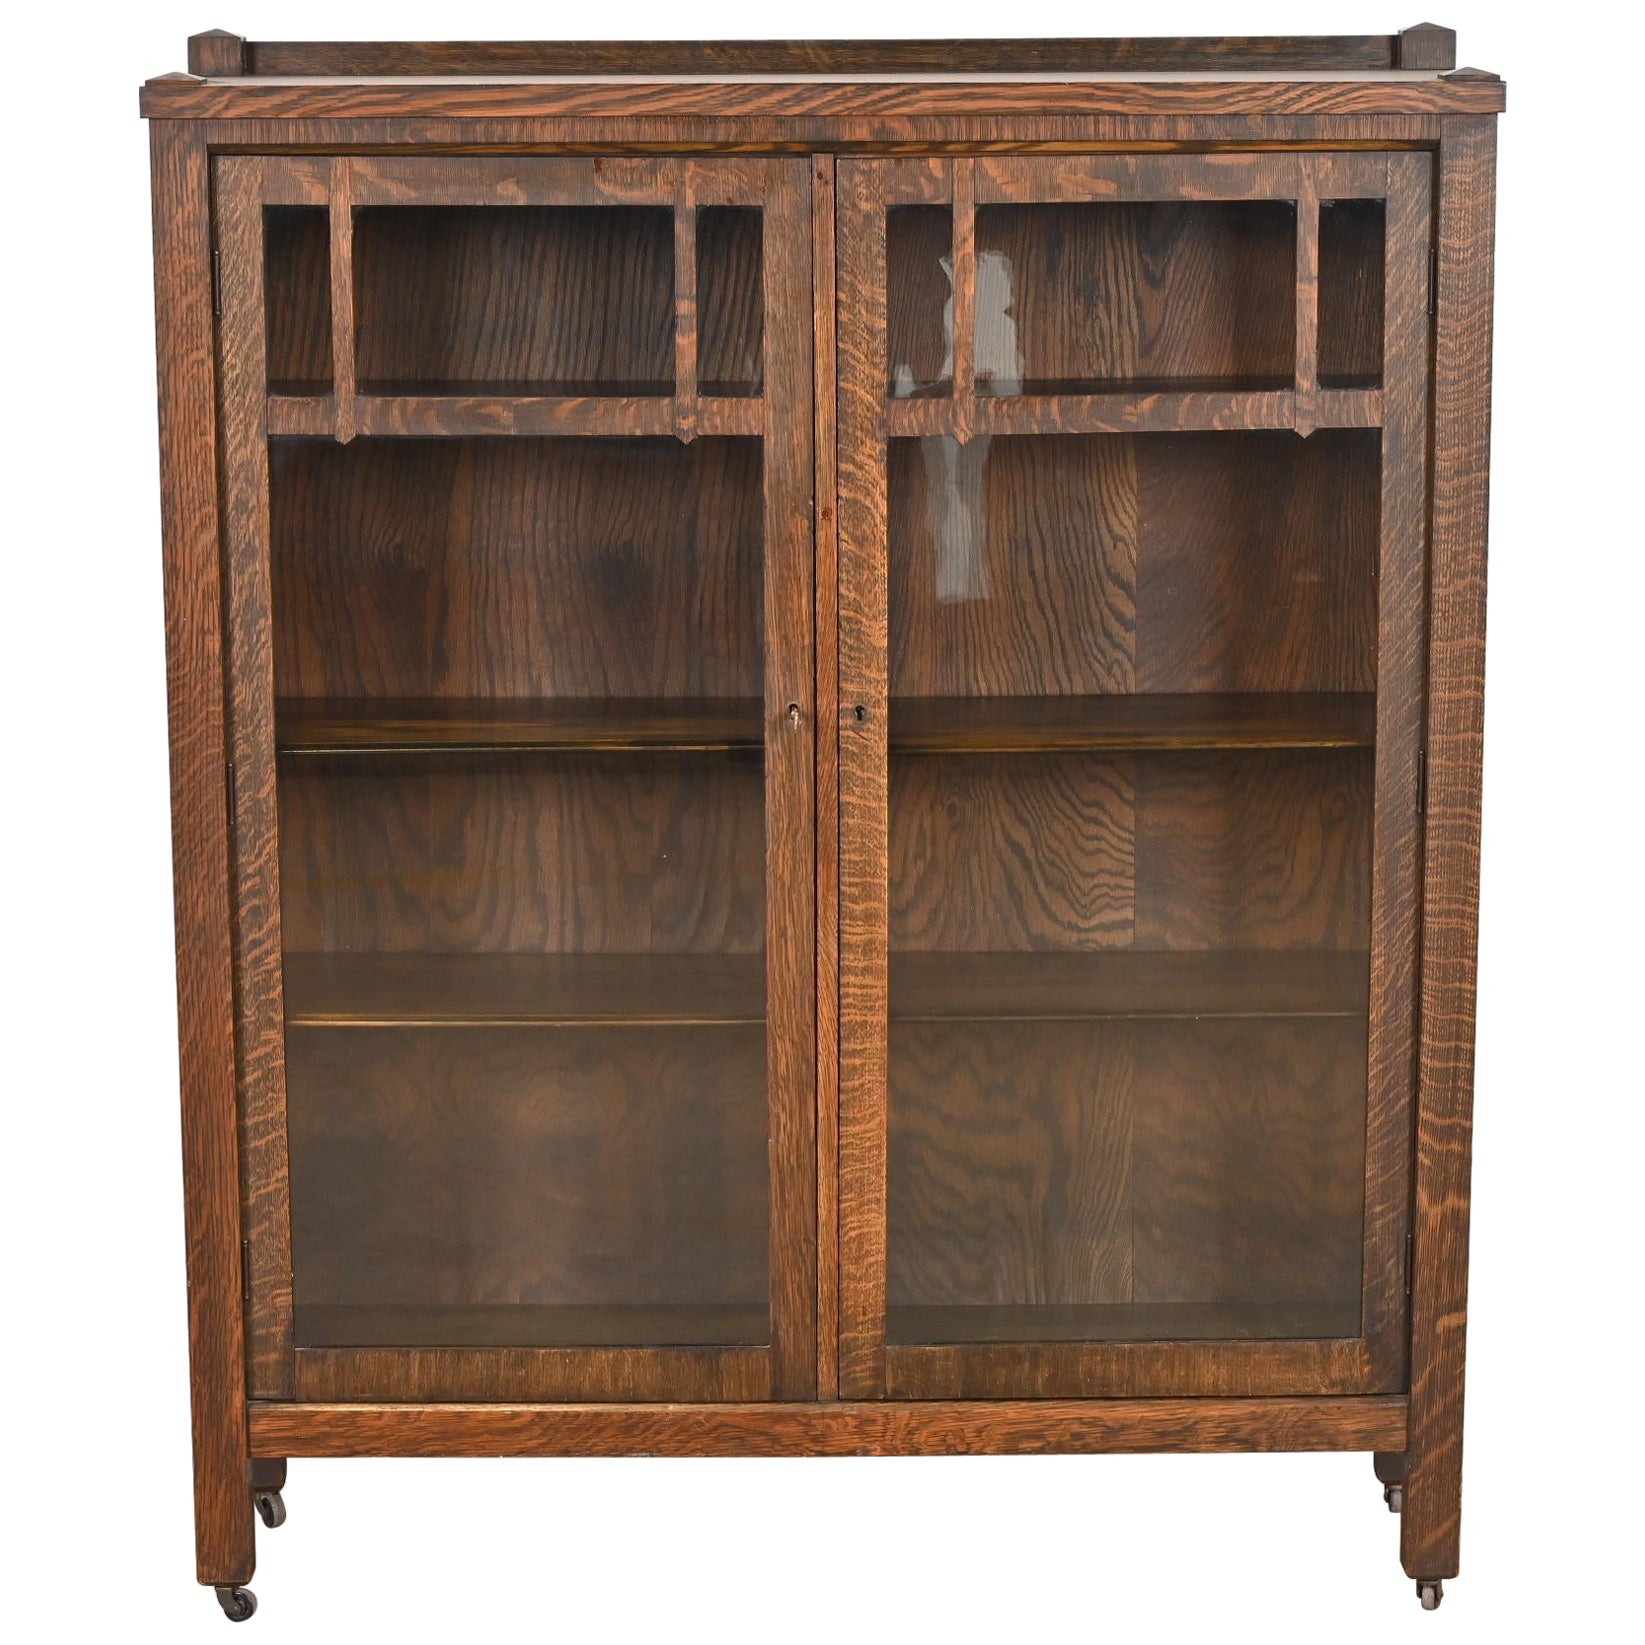 Antique Stickley Style Mission Oak Arts and Crafts Double Bookcase, Circa 1900